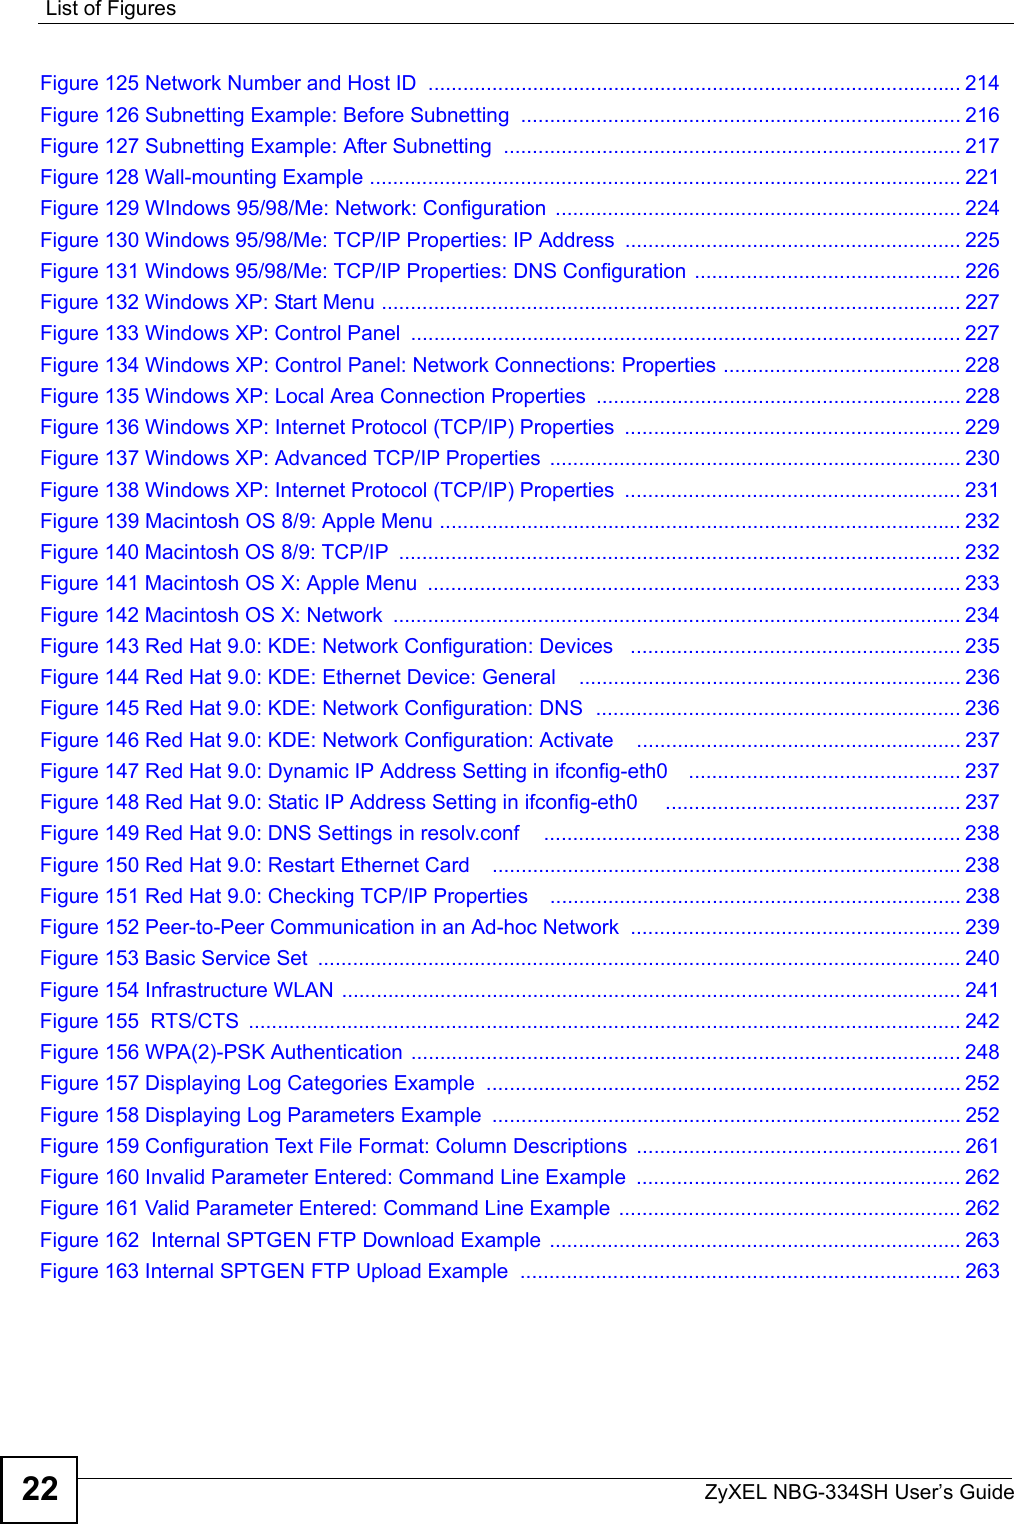 List of FiguresZyXEL NBG-334SH User’s Guide22Figure 125 Network Number and Host ID  ............................................................................................ 214Figure 126 Subnetting Example: Before Subnetting  ............................................................................ 216Figure 127 Subnetting Example: After Subnetting  ............................................................................... 217Figure 128 Wall-mounting Example ...................................................................................................... 221Figure 129 WIndows 95/98/Me: Network: Configuration  ...................................................................... 224Figure 130 Windows 95/98/Me: TCP/IP Properties: IP Address  .......................................................... 225Figure 131 Windows 95/98/Me: TCP/IP Properties: DNS Configuration .............................................. 226Figure 132 Windows XP: Start Menu .................................................................................................... 227Figure 133 Windows XP: Control Panel  ............................................................................................... 227Figure 134 Windows XP: Control Panel: Network Connections: Properties ......................................... 228Figure 135 Windows XP: Local Area Connection Properties ............................................................... 228Figure 136 Windows XP: Internet Protocol (TCP/IP) Properties  .......................................................... 229Figure 137 Windows XP: Advanced TCP/IP Properties  ....................................................................... 230Figure 138 Windows XP: Internet Protocol (TCP/IP) Properties  .......................................................... 231Figure 139 Macintosh OS 8/9: Apple Menu .......................................................................................... 232Figure 140 Macintosh OS 8/9: TCP/IP  ................................................................................................. 232Figure 141 Macintosh OS X: Apple Menu  ............................................................................................ 233Figure 142 Macintosh OS X: Network  .................................................................................................. 234Figure 143 Red Hat 9.0: KDE: Network Configuration: Devices   ......................................................... 235Figure 144 Red Hat 9.0: KDE: Ethernet Device: General    .................................................................. 236Figure 145 Red Hat 9.0: KDE: Network Configuration: DNS  ............................................................... 236Figure 146 Red Hat 9.0: KDE: Network Configuration: Activate    ........................................................ 237Figure 147 Red Hat 9.0: Dynamic IP Address Setting in ifconfig-eth0    ............................................... 237Figure 148 Red Hat 9.0: Static IP Address Setting in ifconfig-eth0     ................................................... 237Figure 149 Red Hat 9.0: DNS Settings in resolv.conf    ........................................................................ 238Figure 150 Red Hat 9.0: Restart Ethernet Card   ................................................................................. 238Figure 151 Red Hat 9.0: Checking TCP/IP Properties    ....................................................................... 238Figure 152 Peer-to-Peer Communication in an Ad-hoc Network  ......................................................... 239Figure 153 Basic Service Set  ............................................................................................................... 240Figure 154 Infrastructure WLAN ........................................................................................................... 241Figure 155  RTS/CTS  ........................................................................................................................... 242Figure 156 WPA(2)-PSK Authentication ............................................................................................... 248Figure 157 Displaying Log Categories Example  .................................................................................. 252Figure 158 Displaying Log Parameters Example  ................................................................................. 252Figure 159 Configuration Text File Format: Column Descriptions  ........................................................ 261Figure 160 Invalid Parameter Entered: Command Line Example  ........................................................ 262Figure 161 Valid Parameter Entered: Command Line Example  ........................................................... 262Figure 162  Internal SPTGEN FTP Download Example  ....................................................................... 263Figure 163 Internal SPTGEN FTP Upload Example  ............................................................................ 263